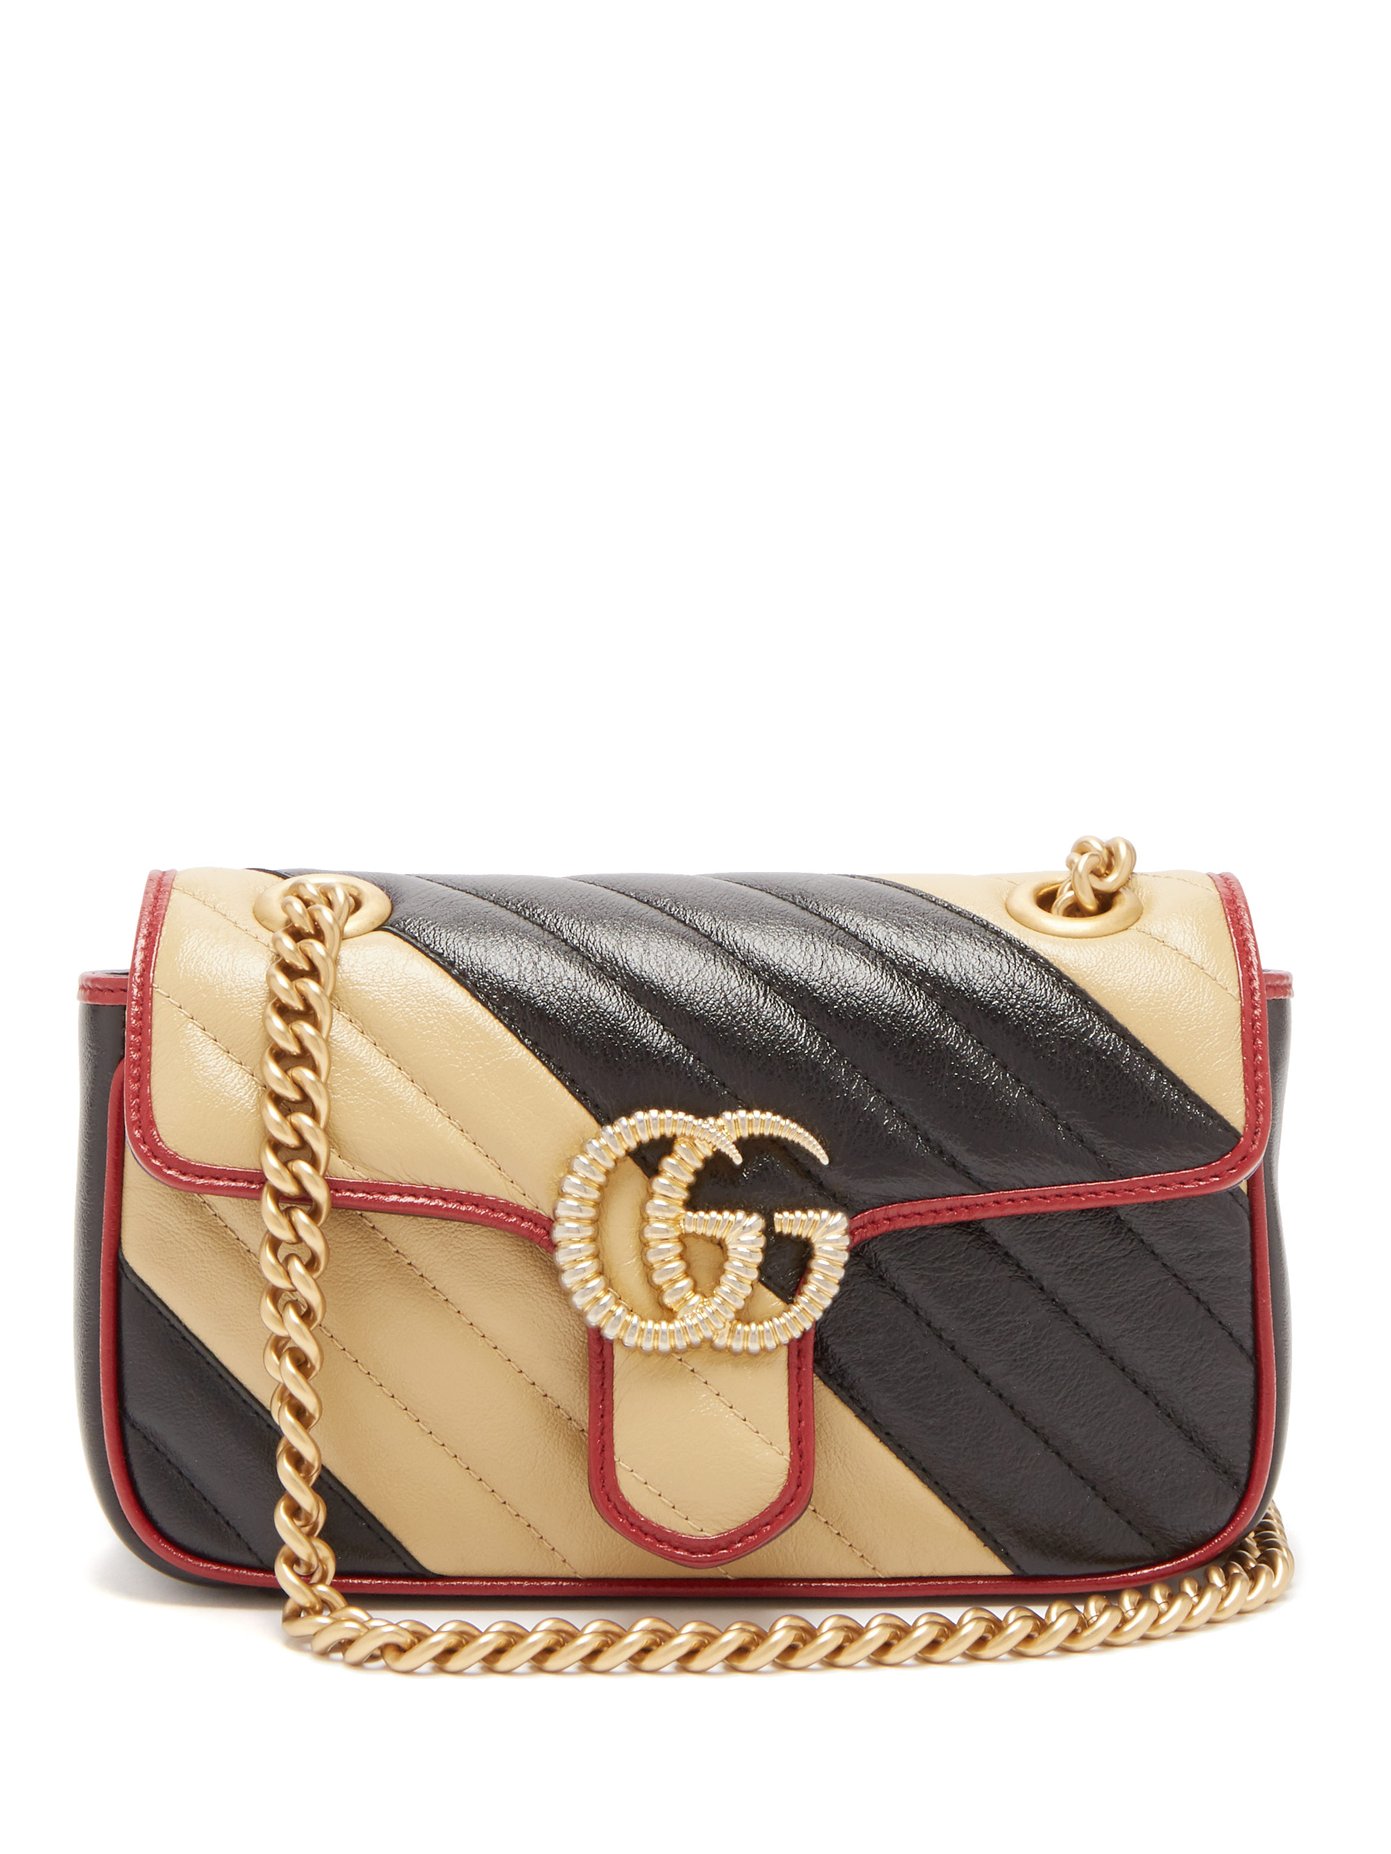 price of gucci marmont bag